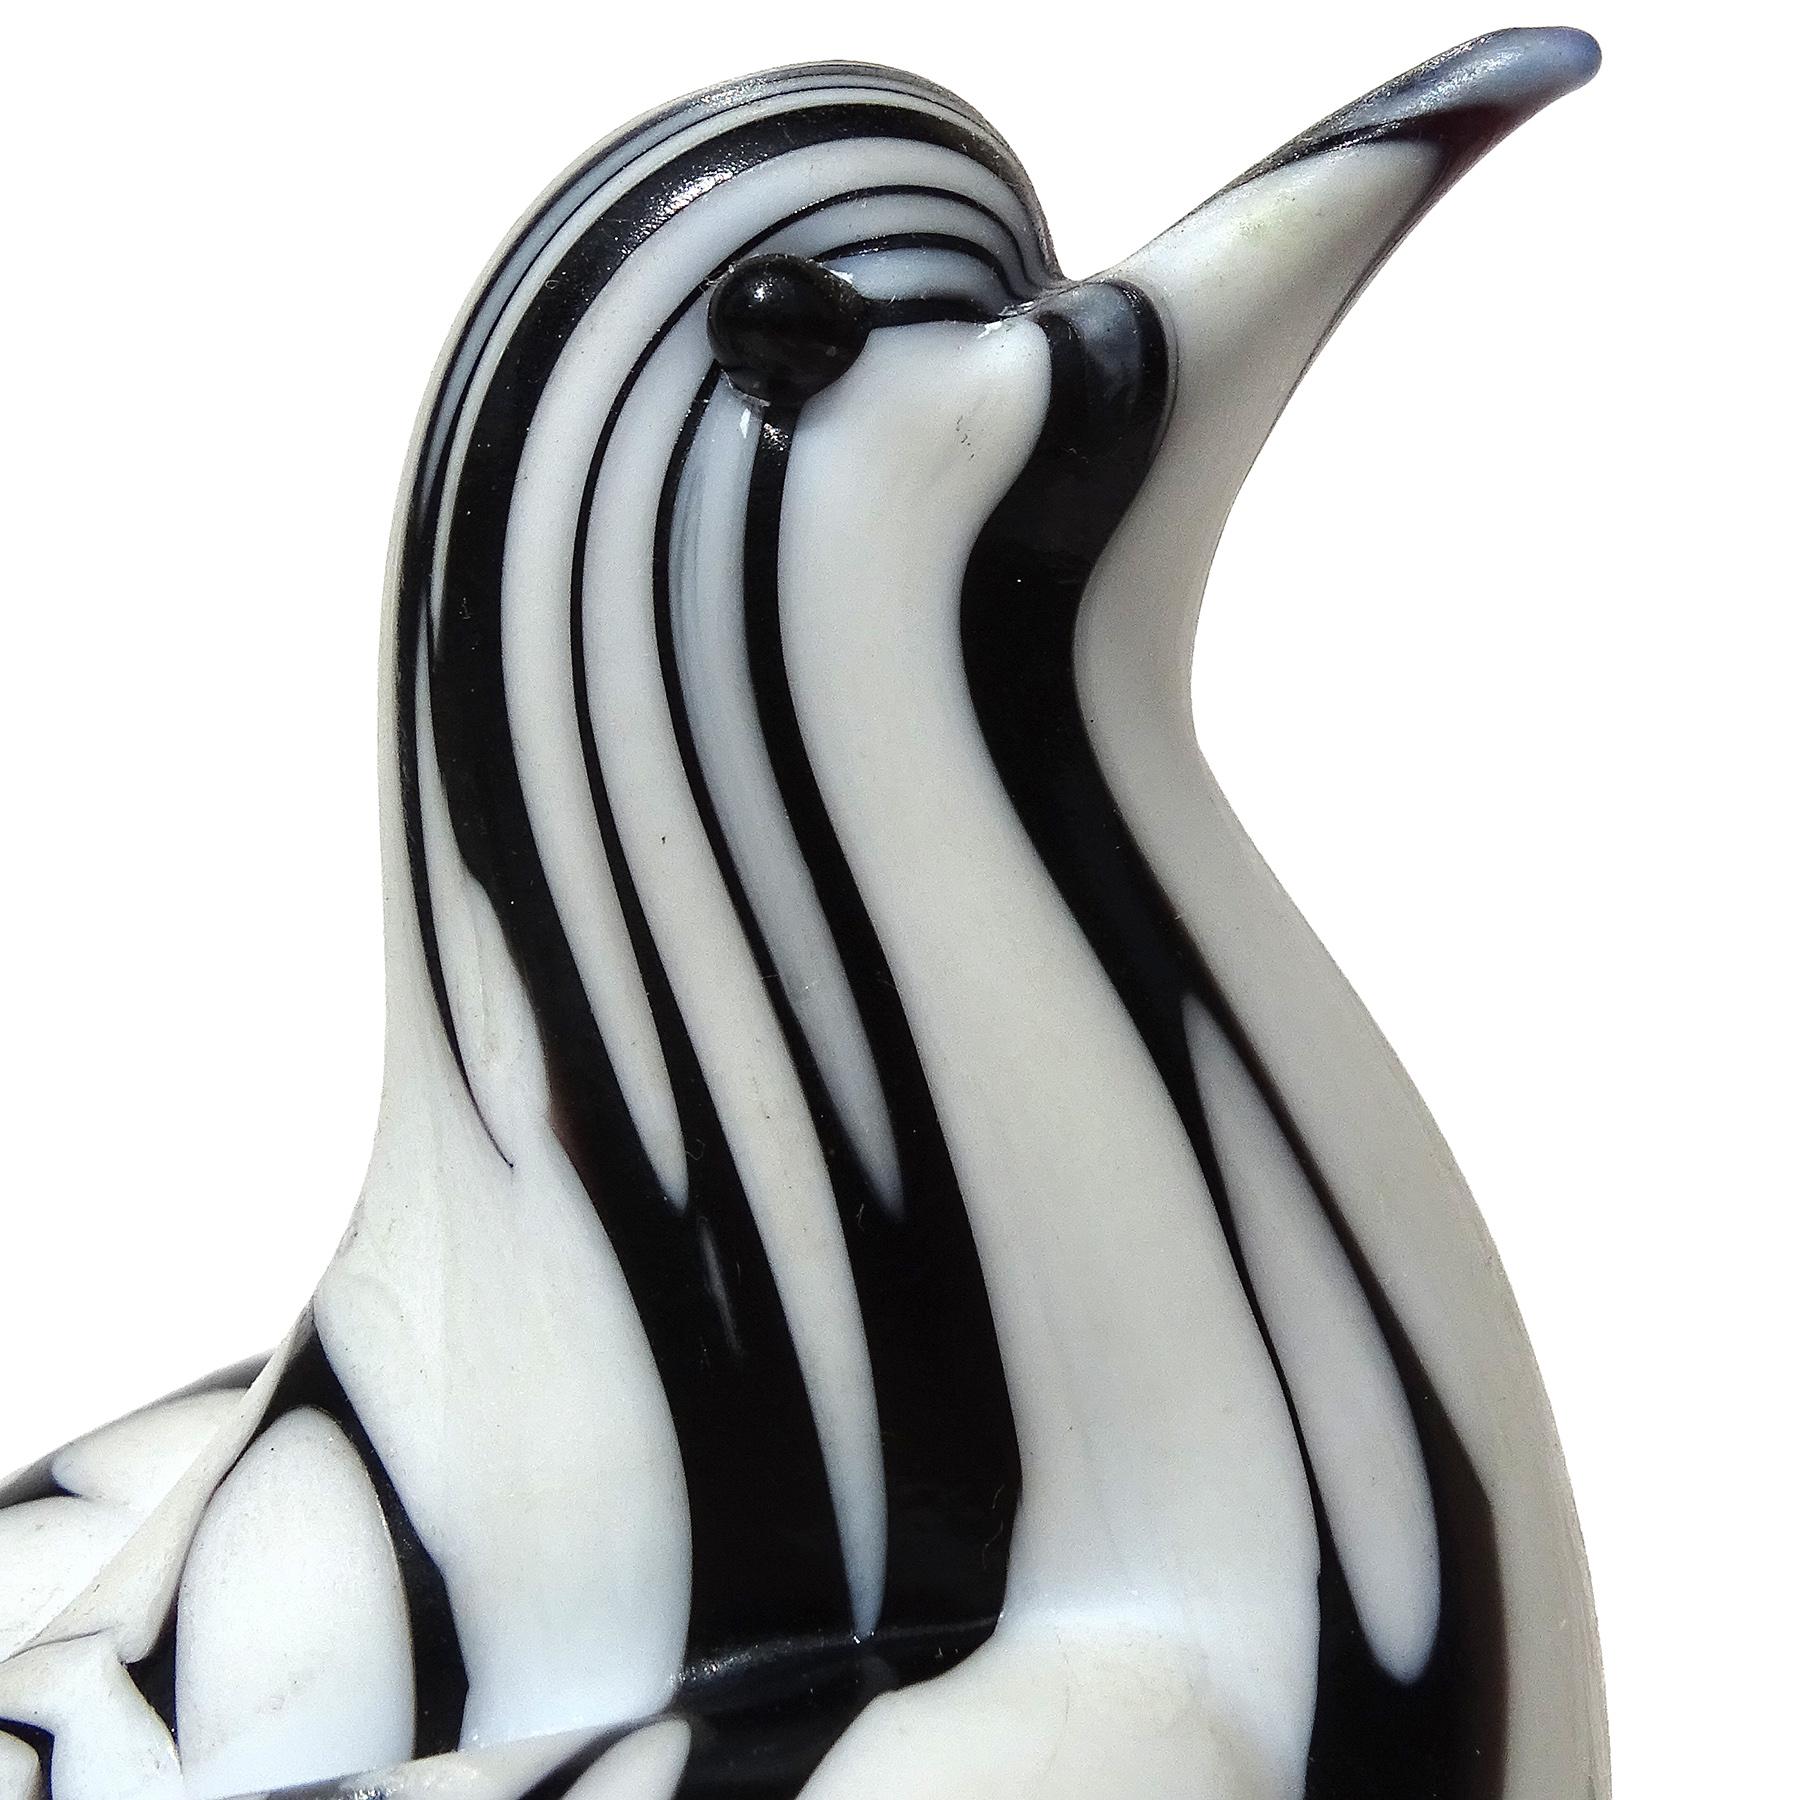 Beautiful vintage Murano hand blown black and white spotted Italian art glass dove bird figurine sculpture. Documented to designer Archimede Seguso, from the 